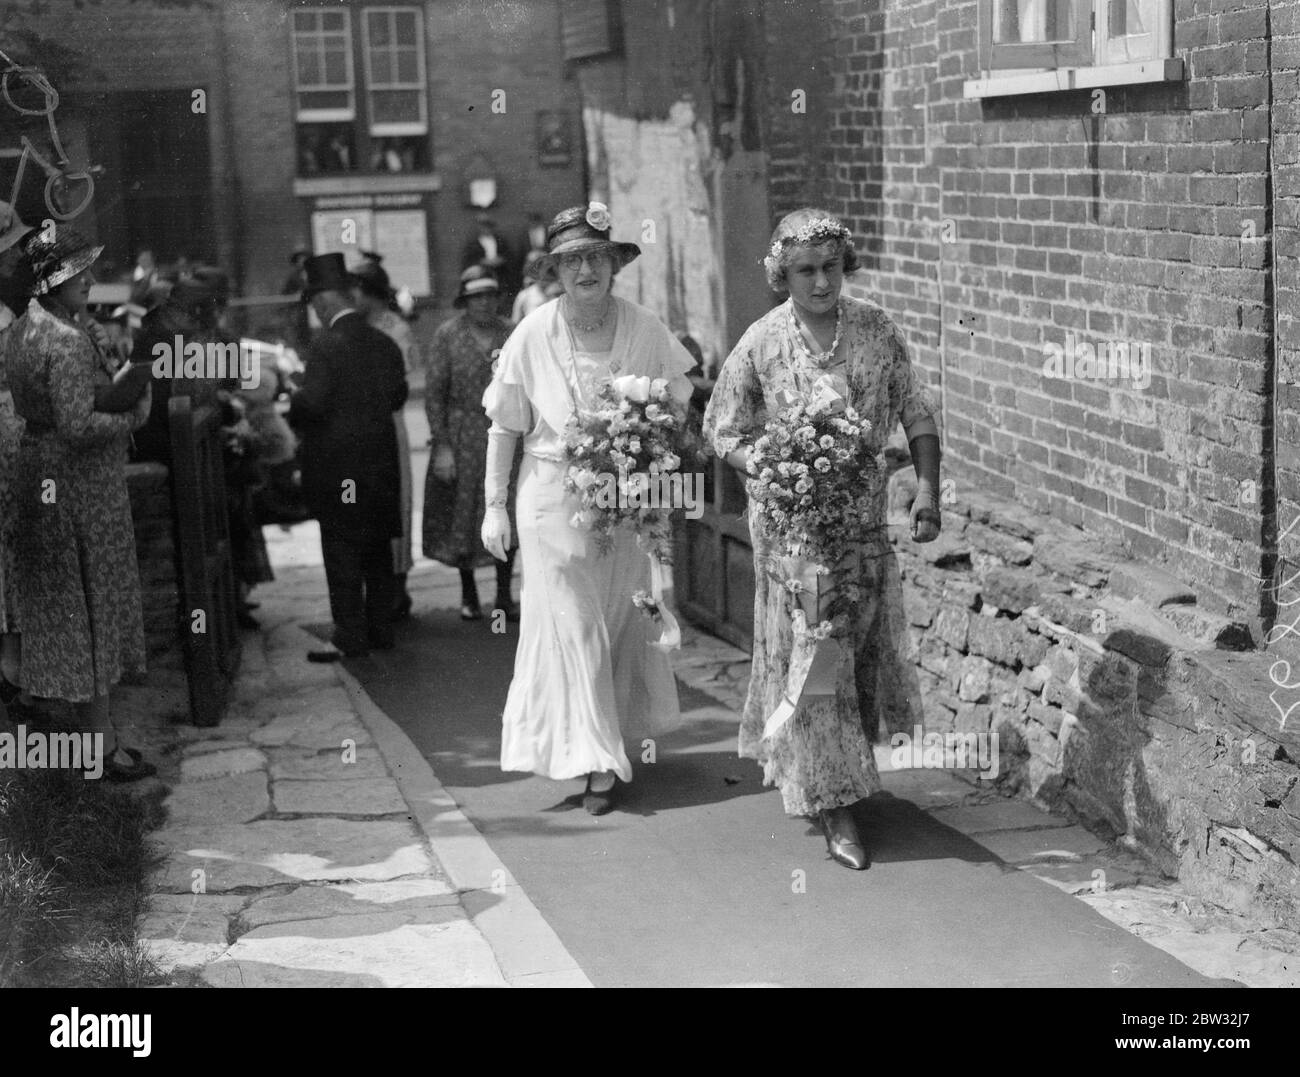 Heiress with veto on marriage acts as bridesmaid to her sister at staplehurst wedding . Miss Marjorie Clementson , daughter of the Rector of Staplehurst , Kent , who was left a large fortune providing she did not marry acted as a bridesmaid to her sister , Miss Vera Clementson , at her wedding to Major A Simkins , at Staplehurst Parish Church . Mr Bernard Thorp , Miss Clementson ' s fiance , acted as usher . The bride and groom ( on right 0 with Miss Marjorie Clementson the bridesmaid and her fiance Mr Bernard Thorp pf Manchester who acted as usher , after the wedding . 8 August 1932 Stock Photo